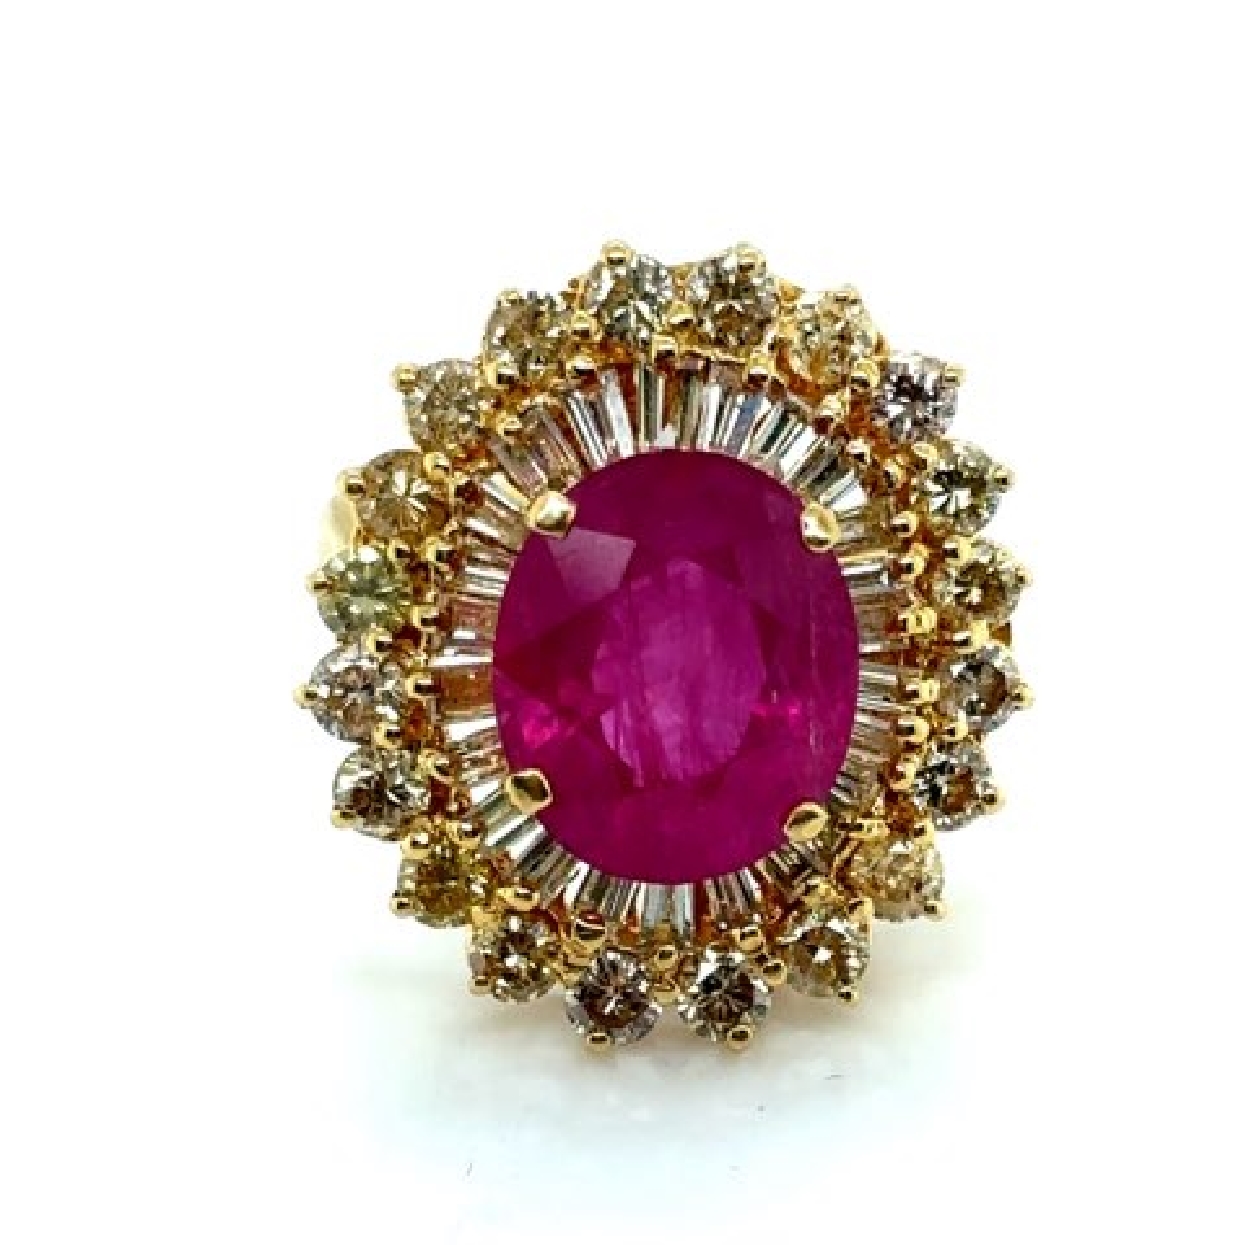 18K Yellow Gold Filigree Ruby Ring 5.49CT with Double Diamond Halo 3.00CT 

Size 7

Gemstone Report on File for Ruby Center Stone